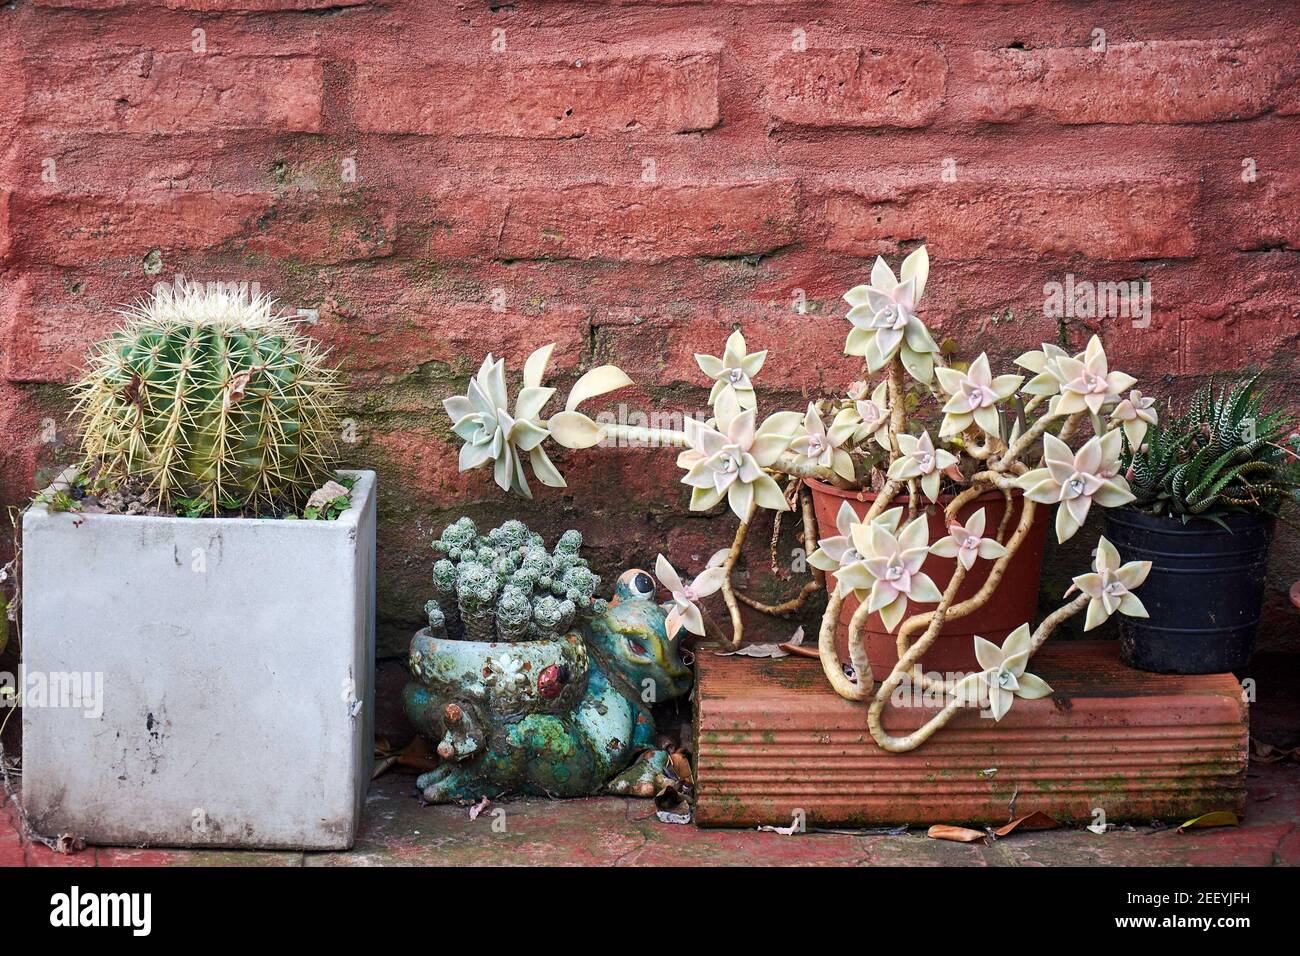 Succulent plants and cactus in plantpots against old wall of concrete and red bricks. Stock Photo